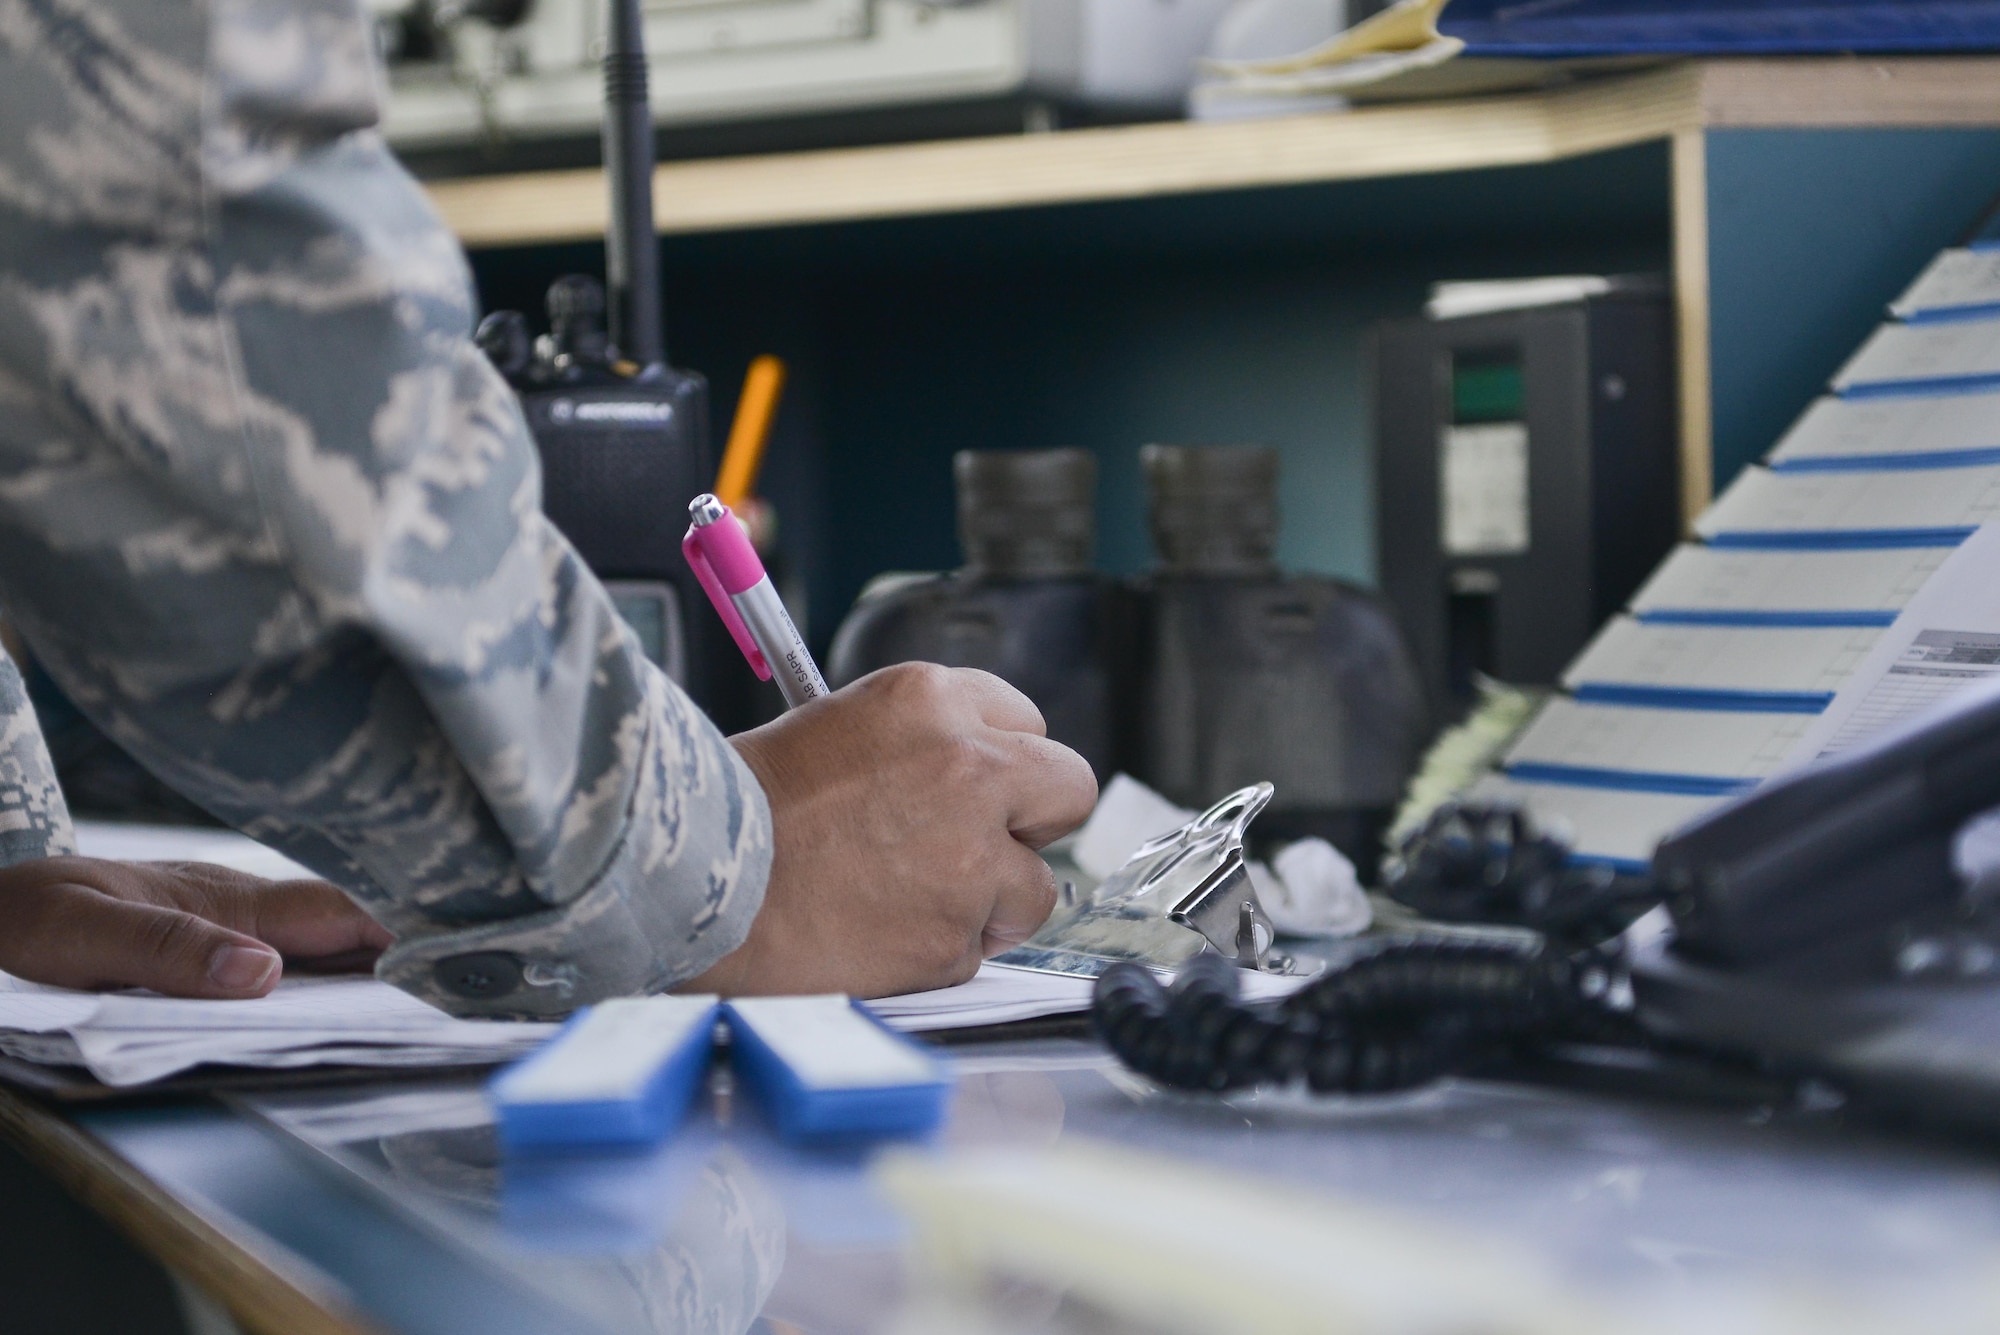 Tech. Sgt. Kelena Hendricks, 379th Expeditionary Operations Support Squadron air traffic controller, updates her progress strips with departing aircraft September 2, 2015 at Al Udeid Air Base, Qatar. U.S. Air Force air traffic controllers deployed to Al Udeid Air Base remain in constant contact with coalition aircraft departing and entering the base’s airspace while working side-by-side with Qatari military ATC. (U.S. Air Force photo/Staff Sgt. Alexandre Montes)